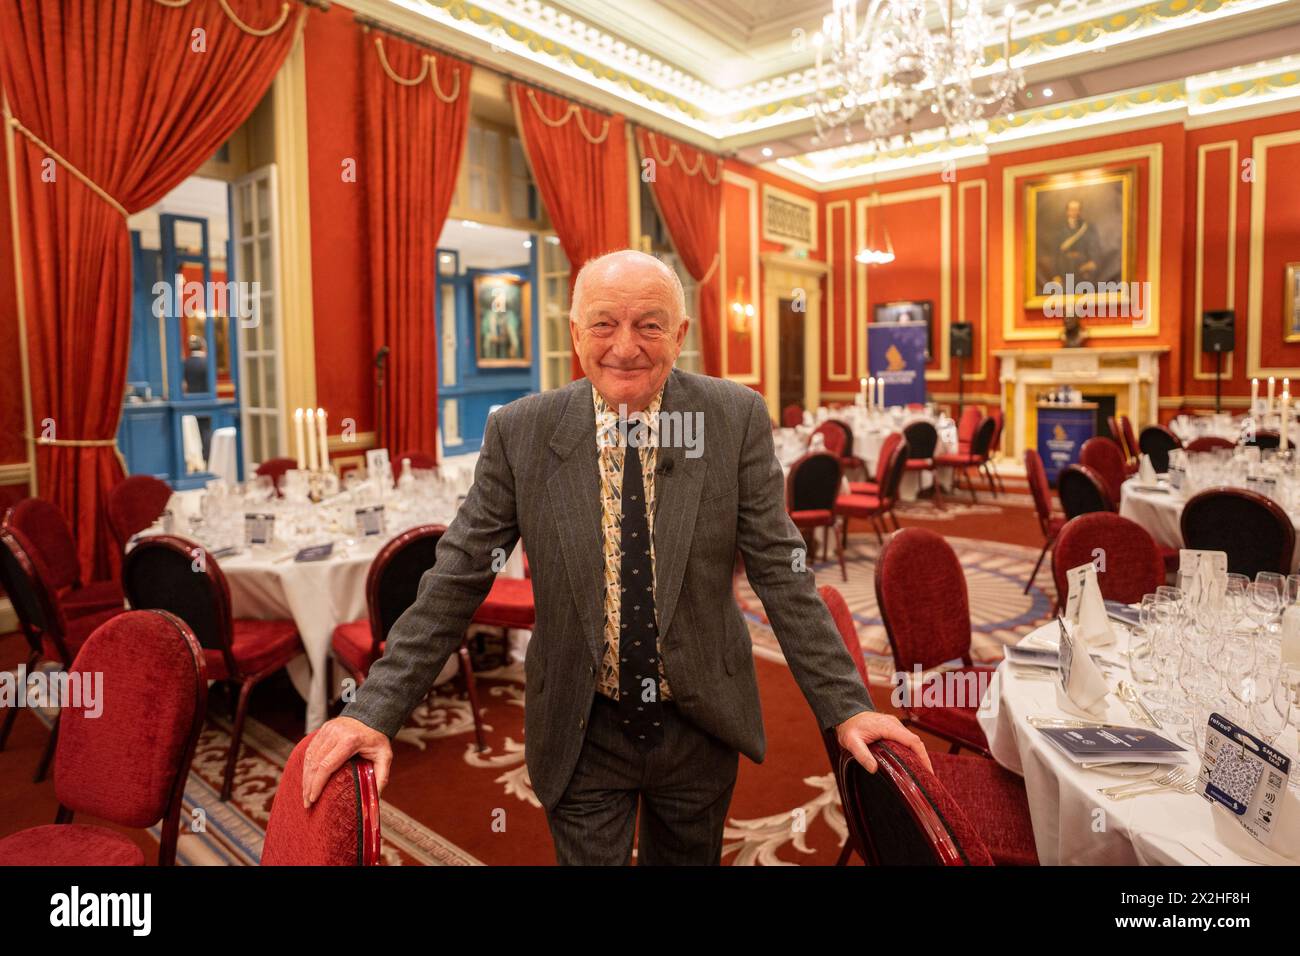 Oz Clarke posing for photos at a corporate event at the RAC Club. Photo date: Tuesday, September 26, 2023. Photo: Richard Gray/Alamy Stock Photo